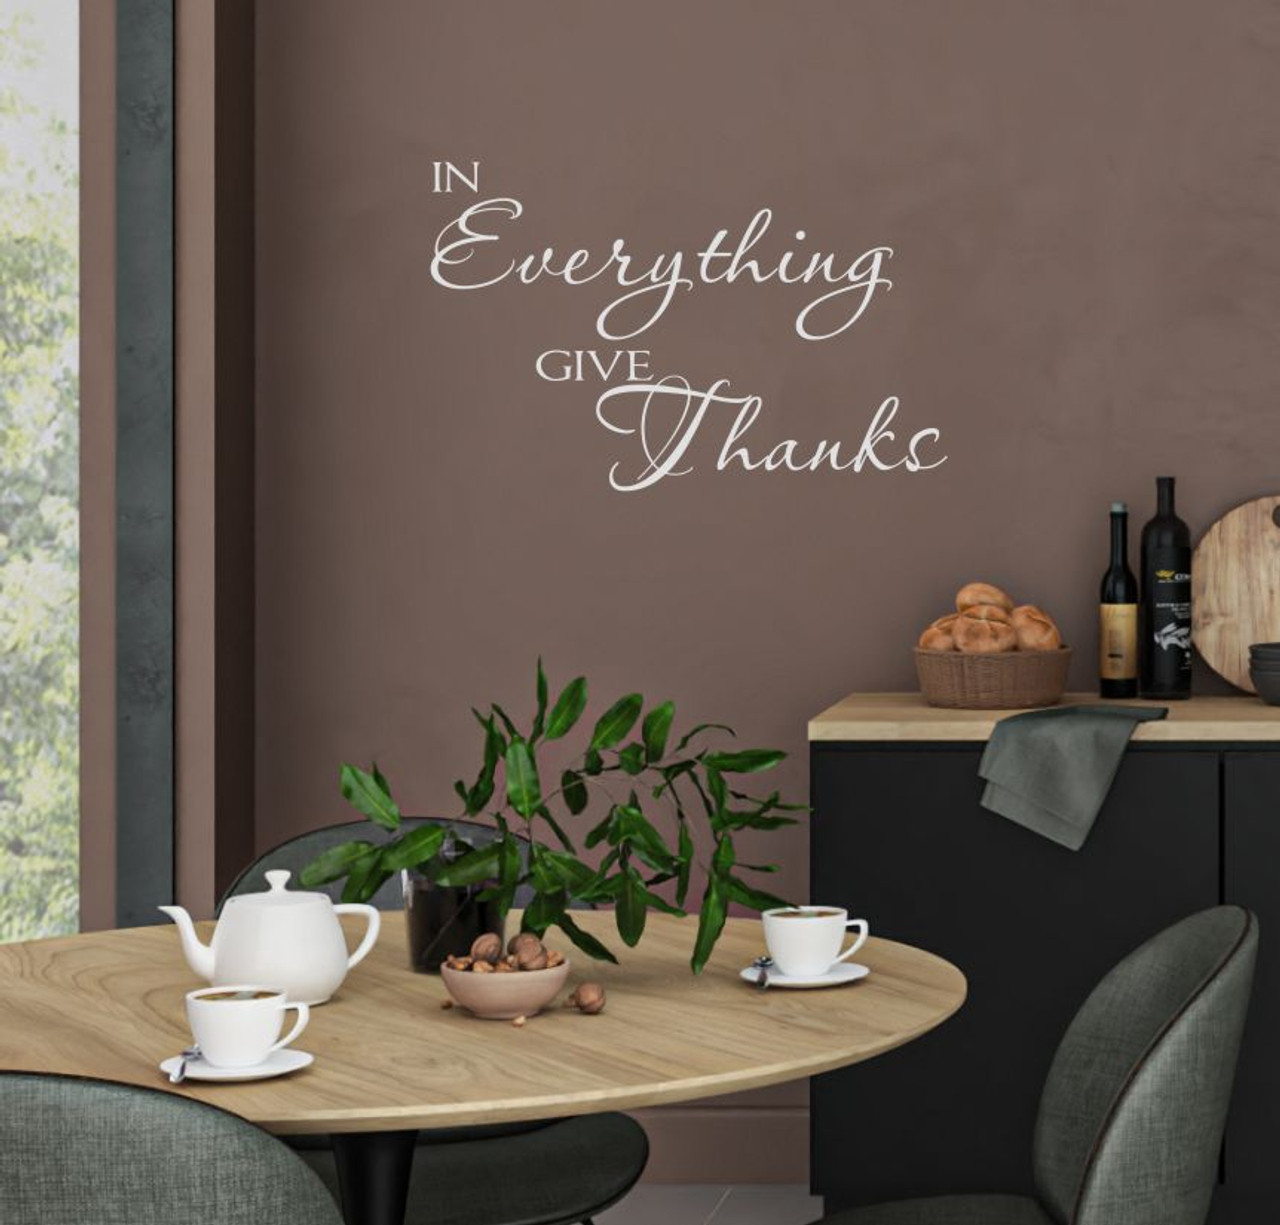 A quote on the kitchen wall with a table, accessories and countertop